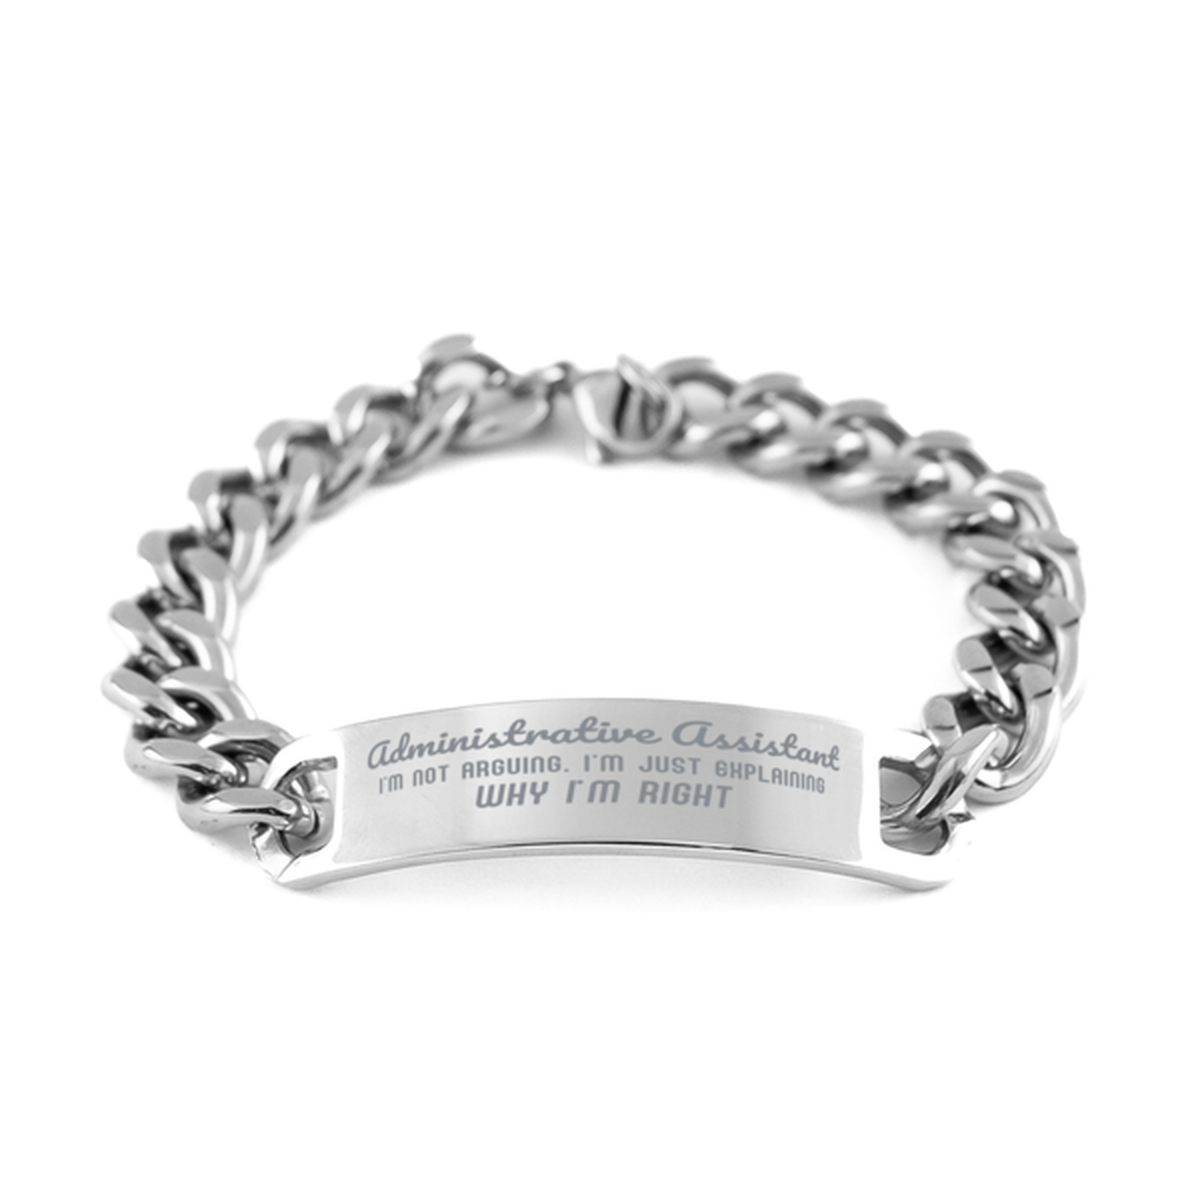 Administrative Assistant I'm not Arguing. I'm Just Explaining Why I'm RIGHT Cuban Chain Stainless Steel Bracelet, Graduation Birthday Christmas Administrative Assistant Gifts For Administrative Assistant Funny Saying Quote Present for Men Women Coworker